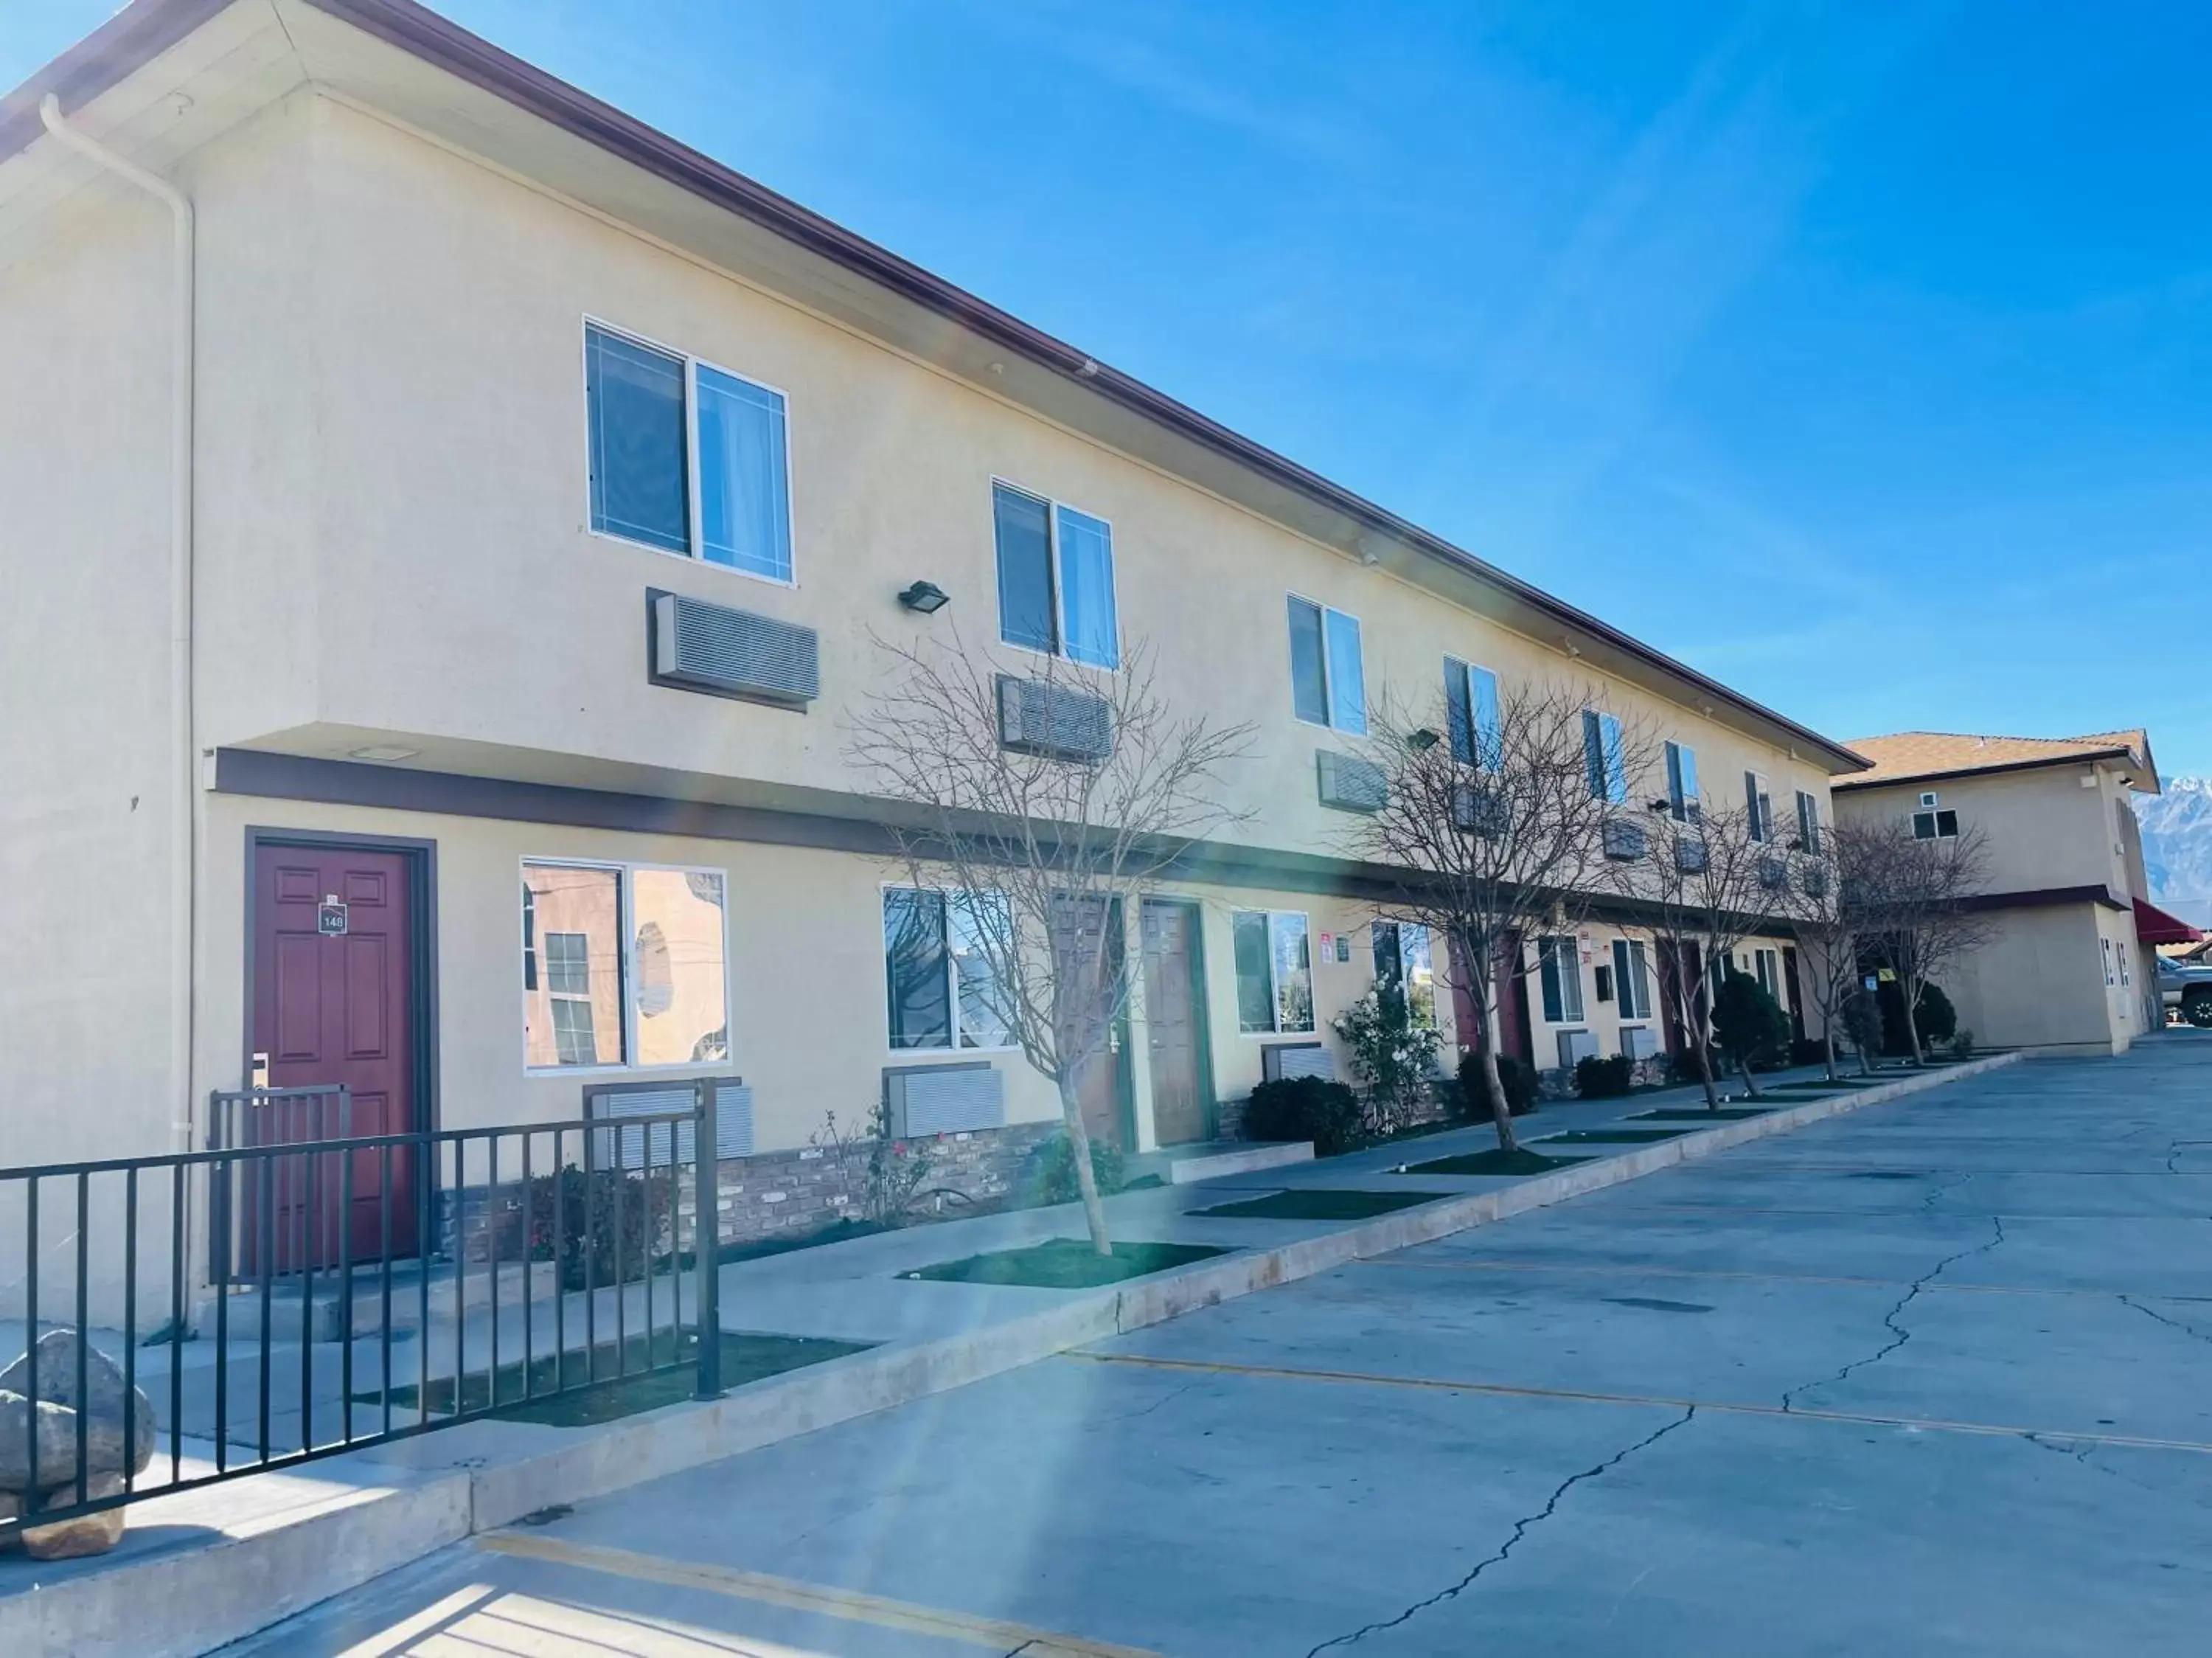 Property Building in Quality Inn Bishop near Mammoth